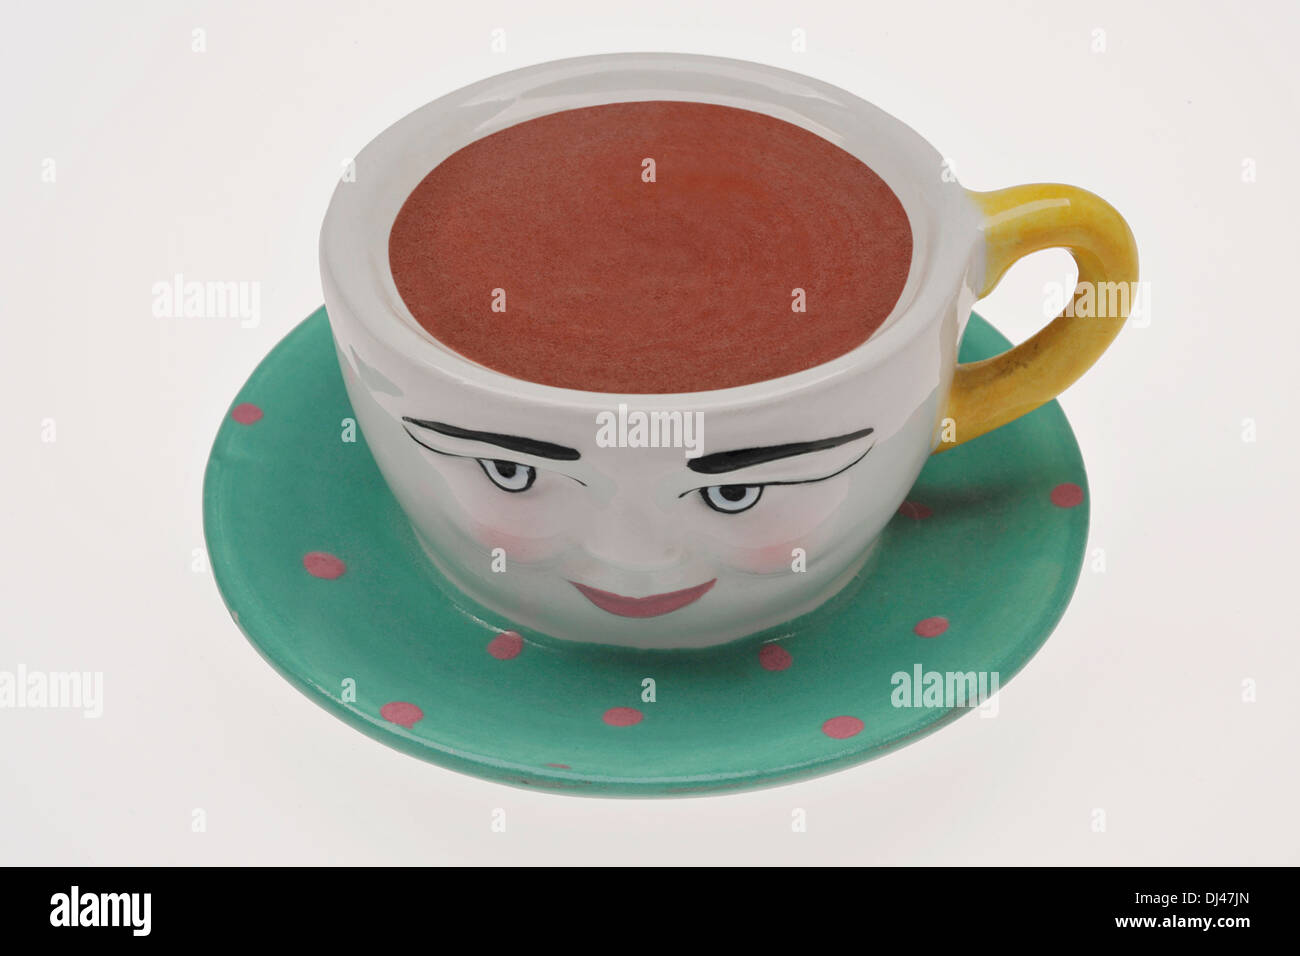 China/ceramic tea cup with smiling face. Stock Photo